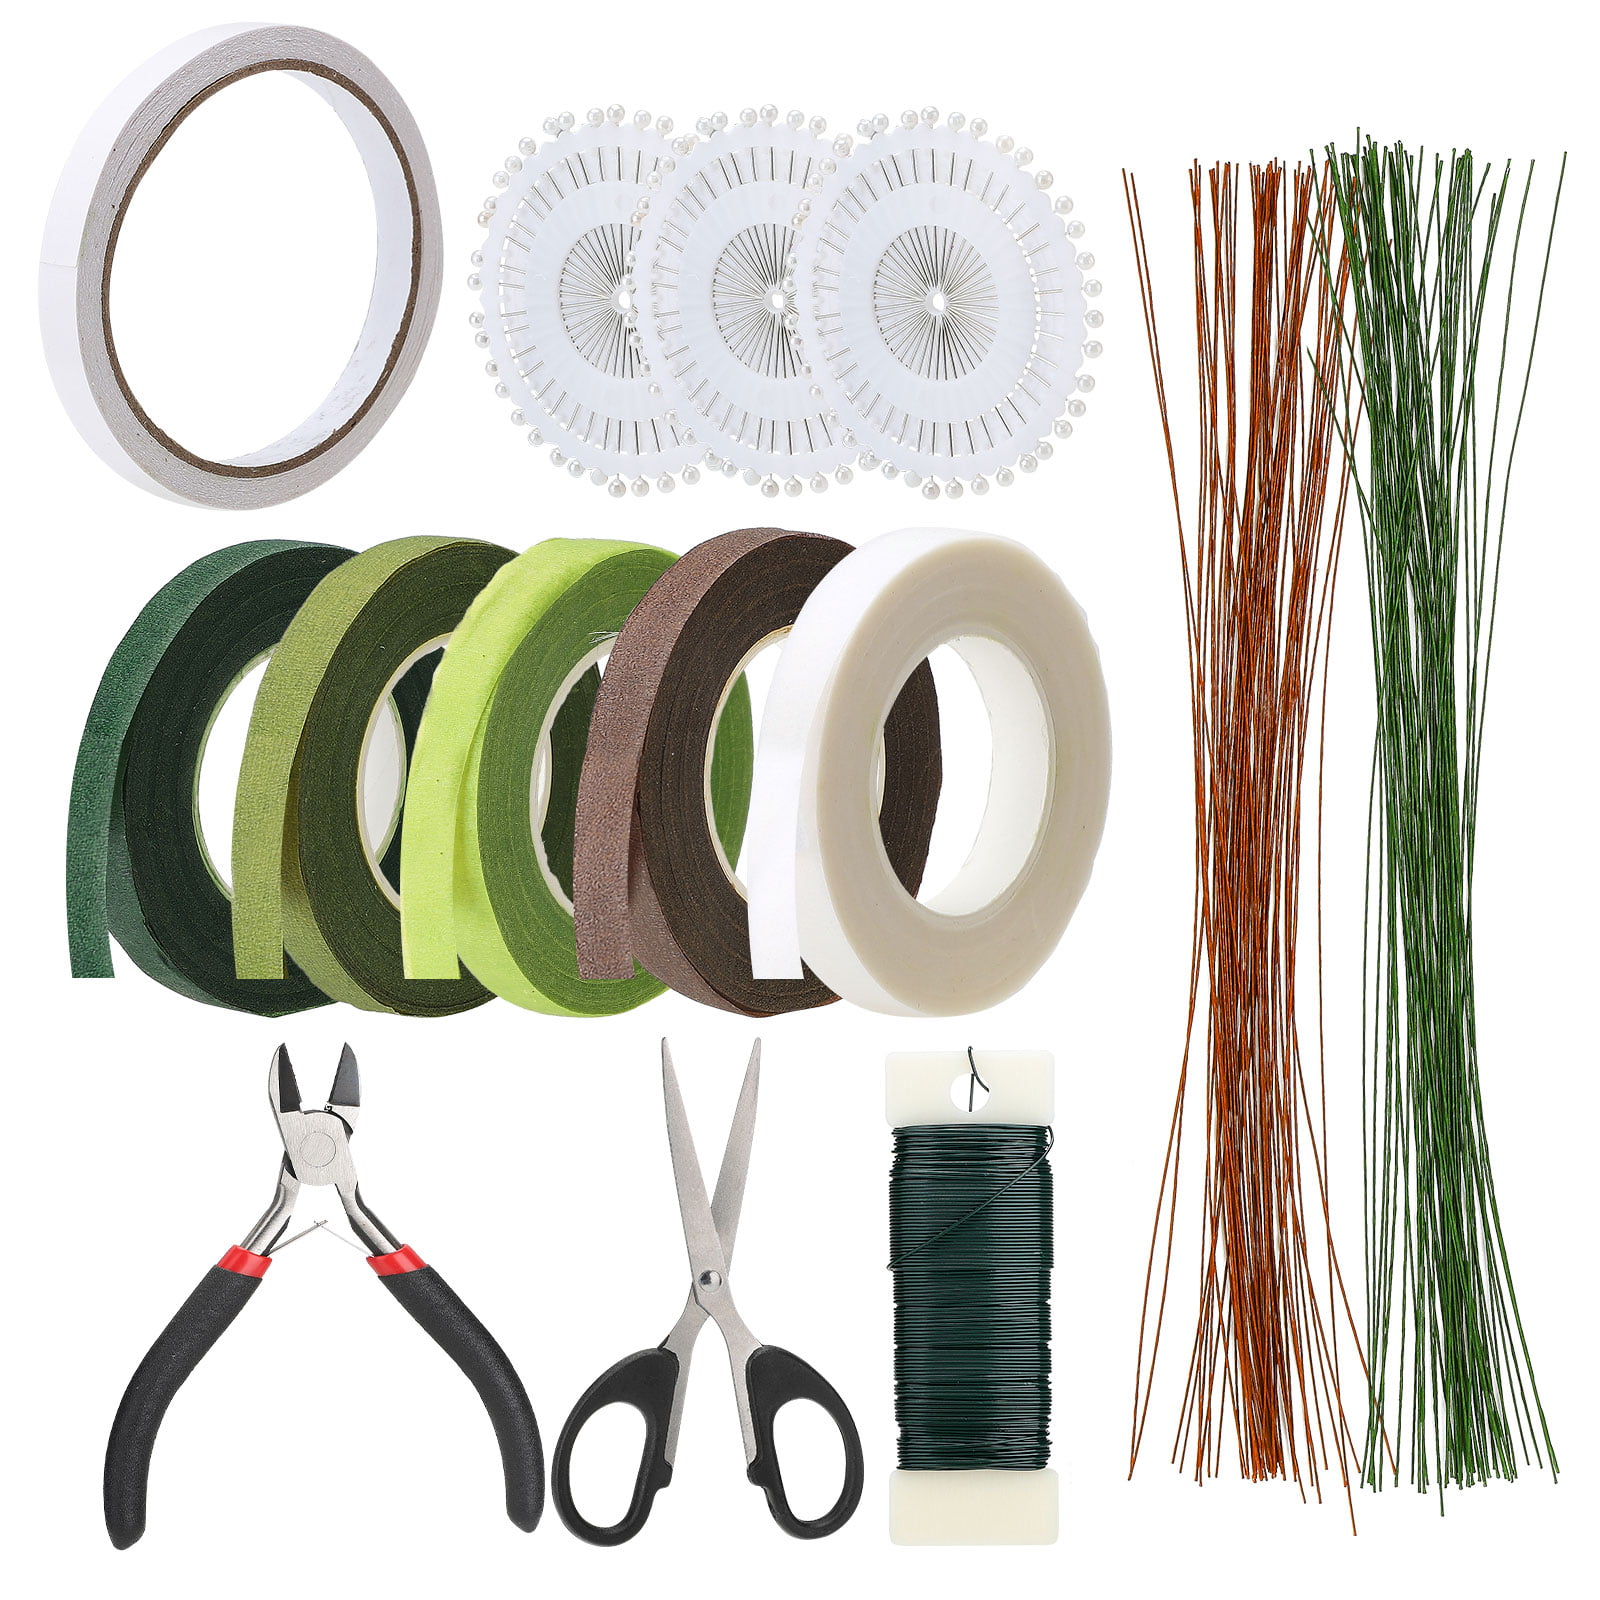 1set Floral Tape And Corsage Pins Kit,include 1 Roll 27M Green Floral Tape  And 100pcs Boutonniere Pin 2in Bouquet Pins,for Wedding Floral Decorations